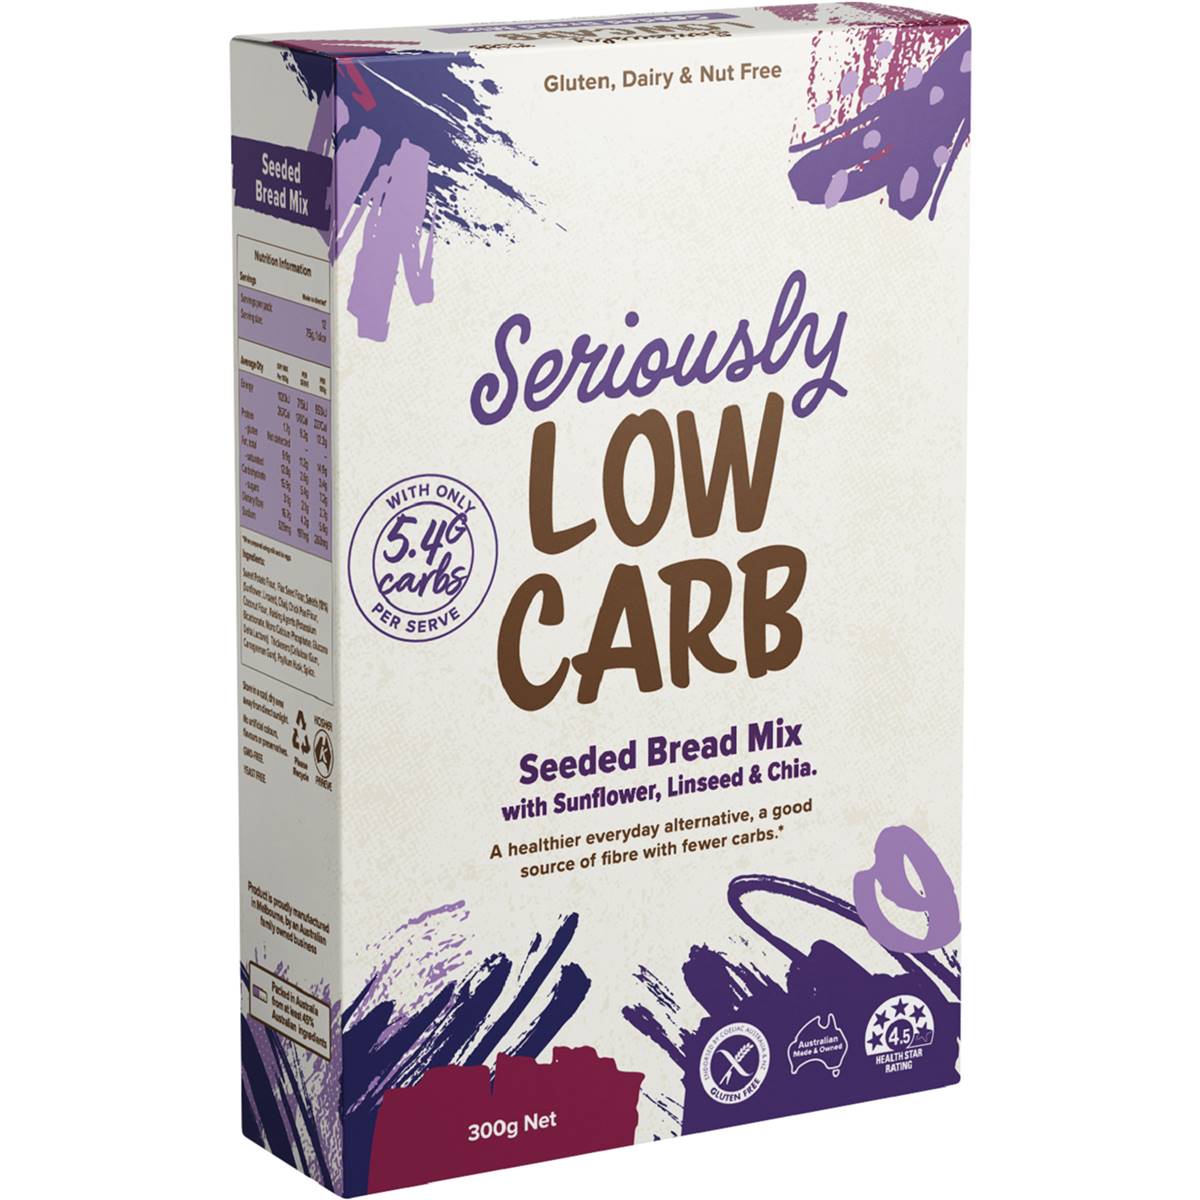 Calories in Seriously Low Carb Seeded Bread Mix